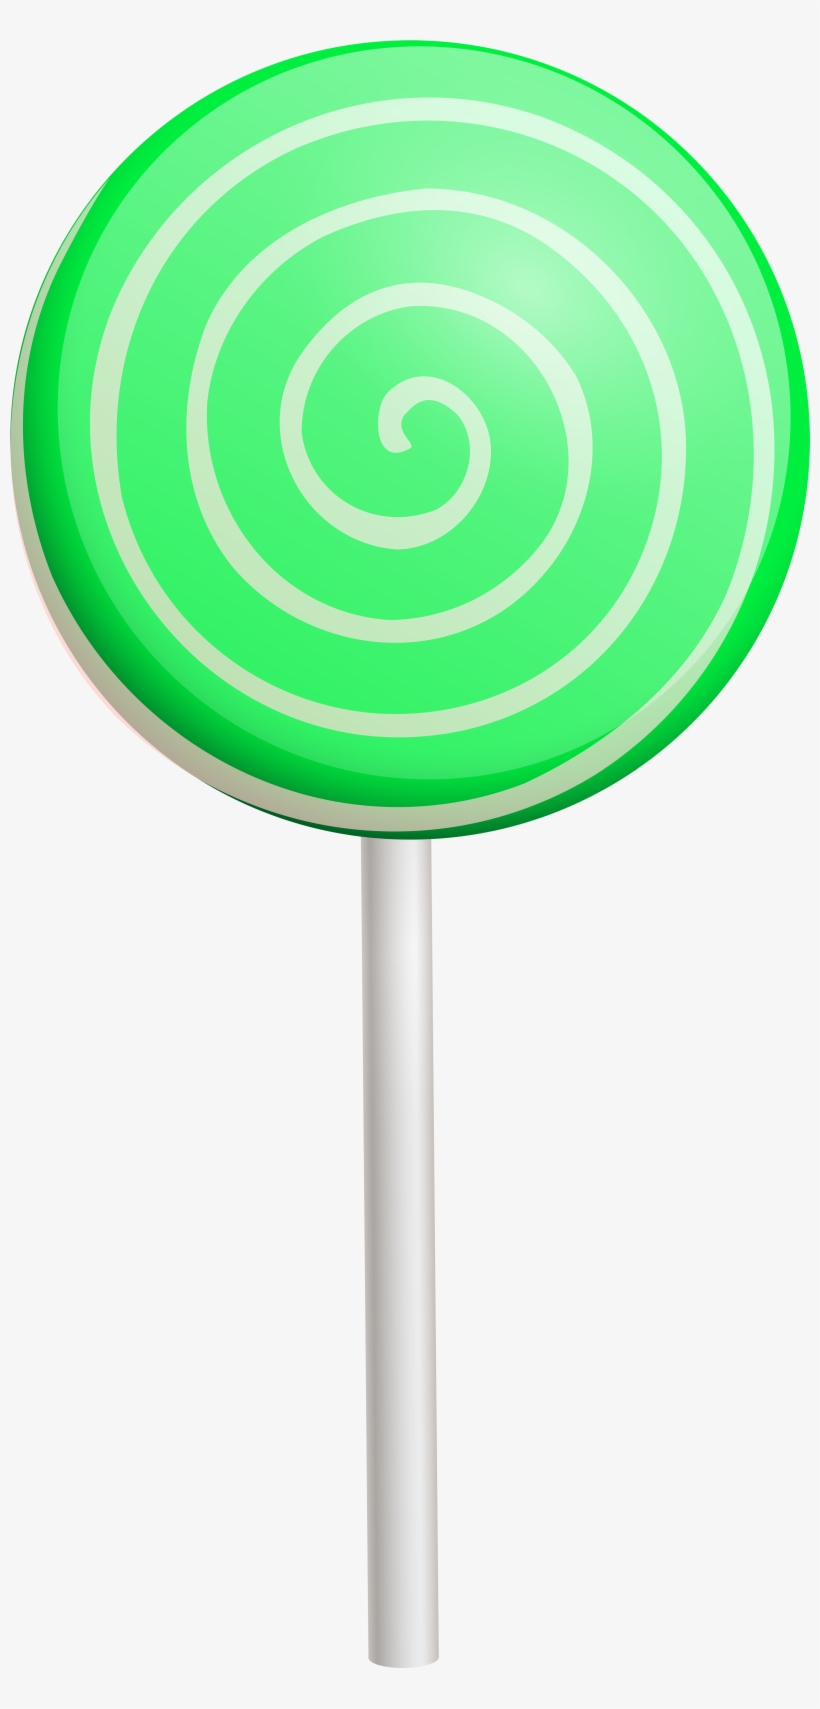 Green Png Clip Art Image Gallery Yopriceville - Green Swirl Lollipop Clipart, transparent png #1006909